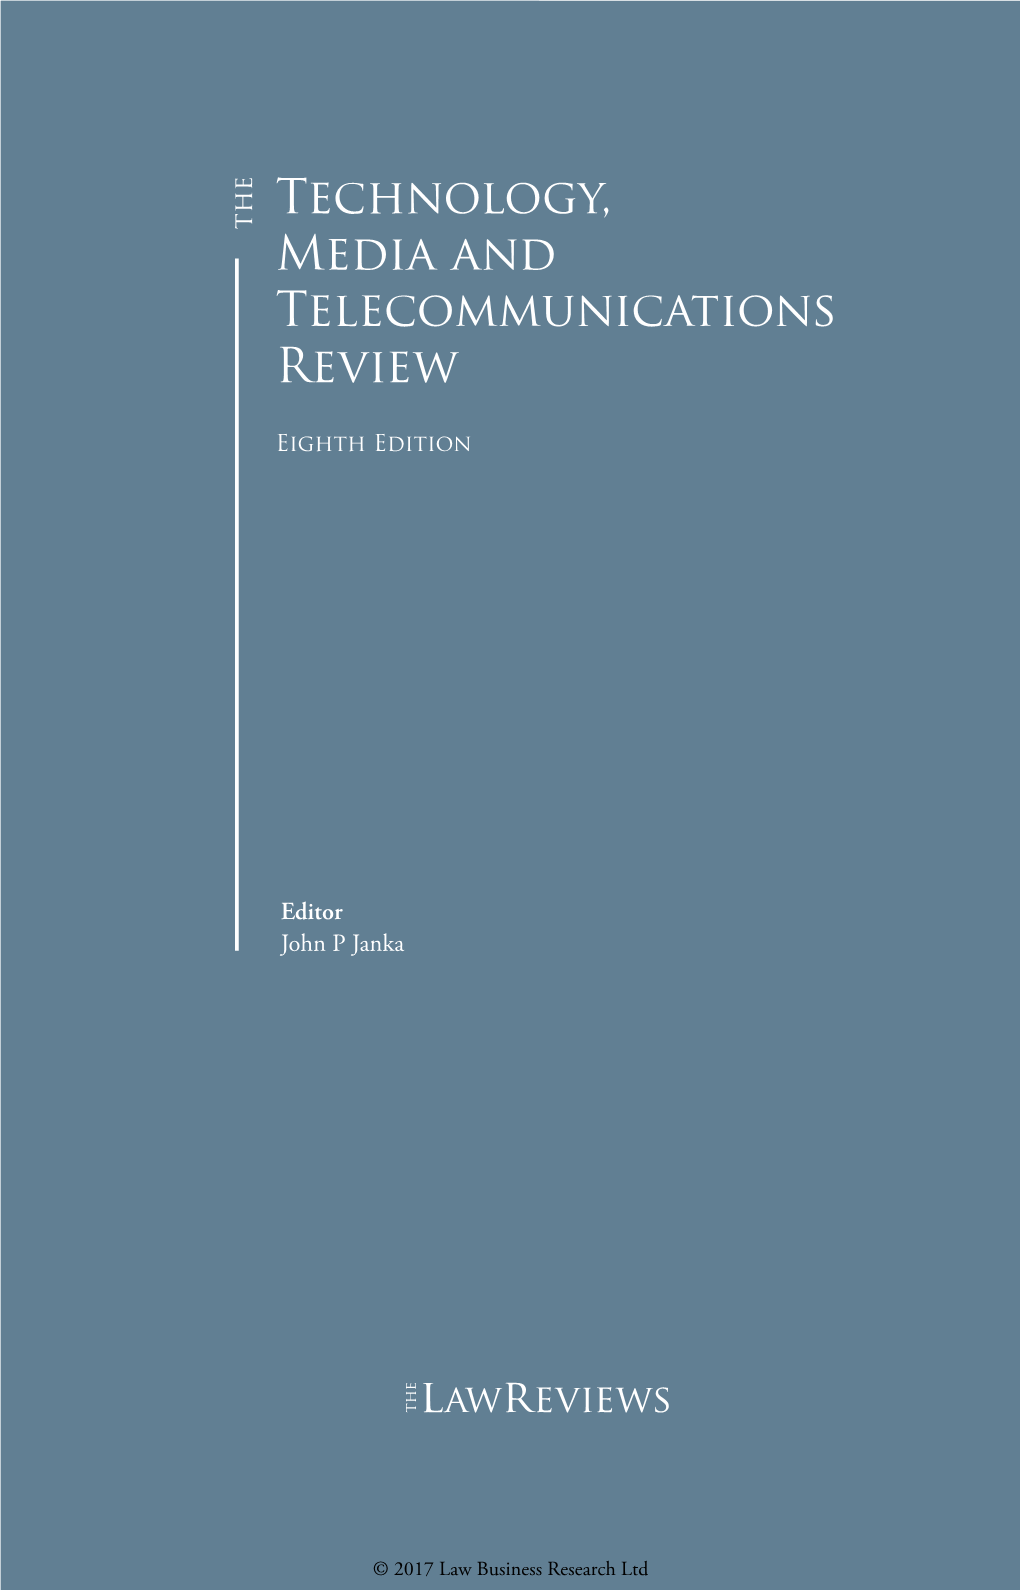 Technology, Media and Telecommunications Review